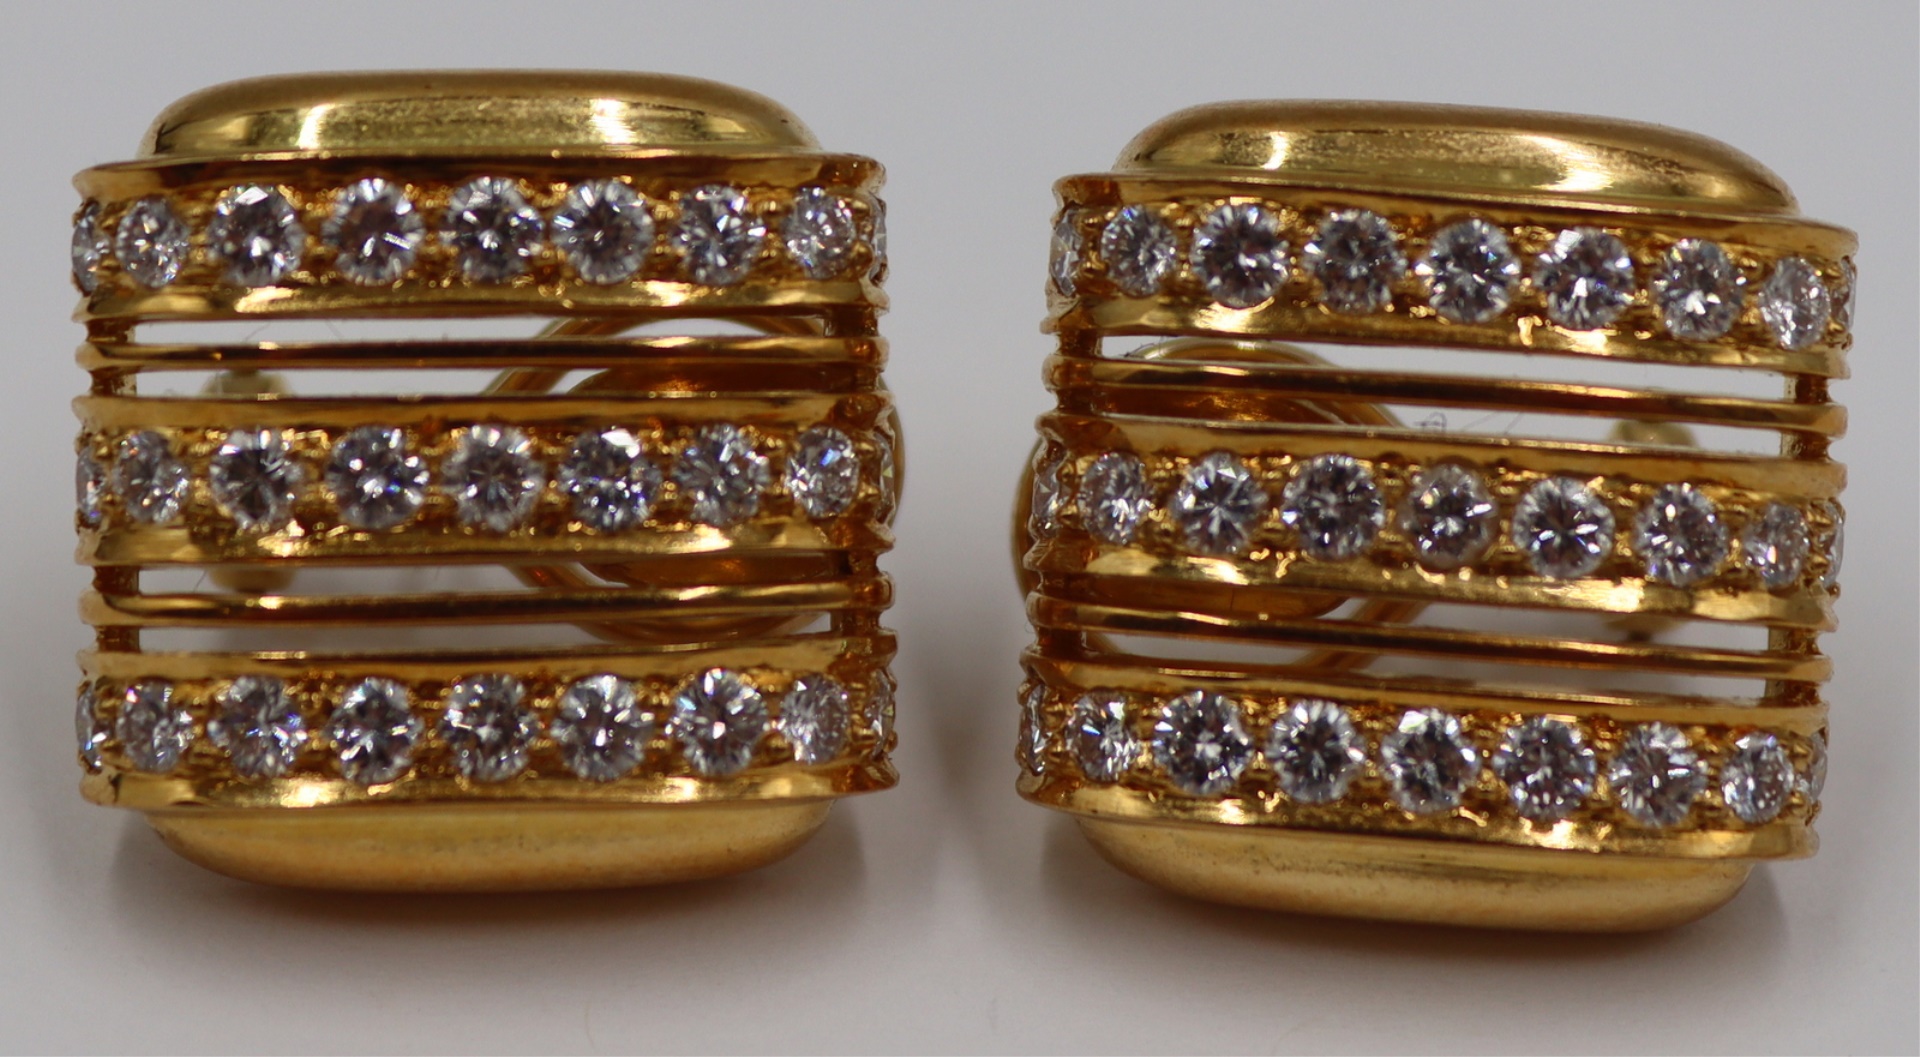 JEWELRY. PAIR OF 18KT GOLD AND